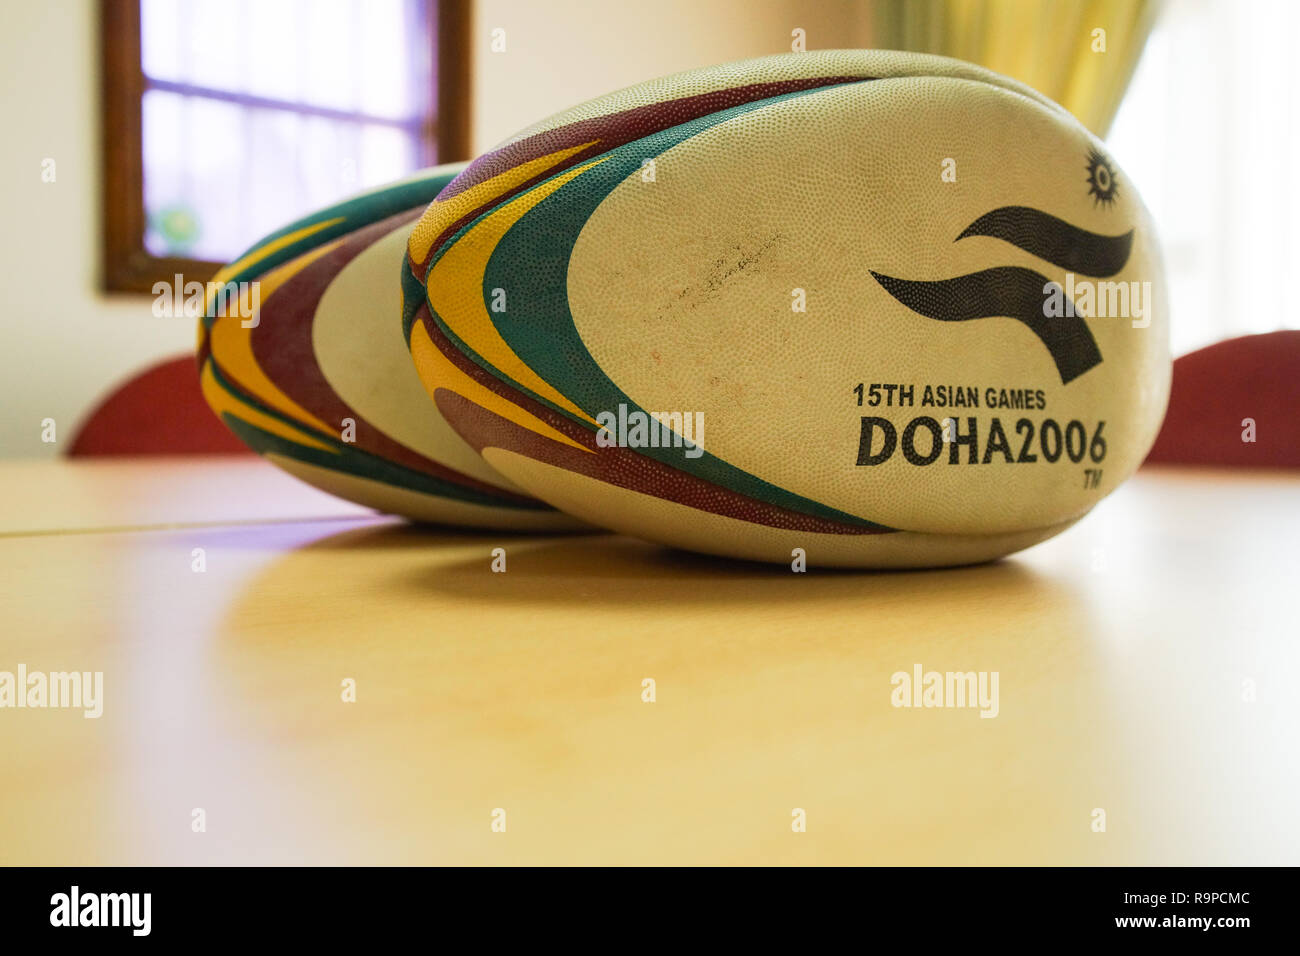 26 February 2013 - Asian games 2006 Rugby ball Stock Photo